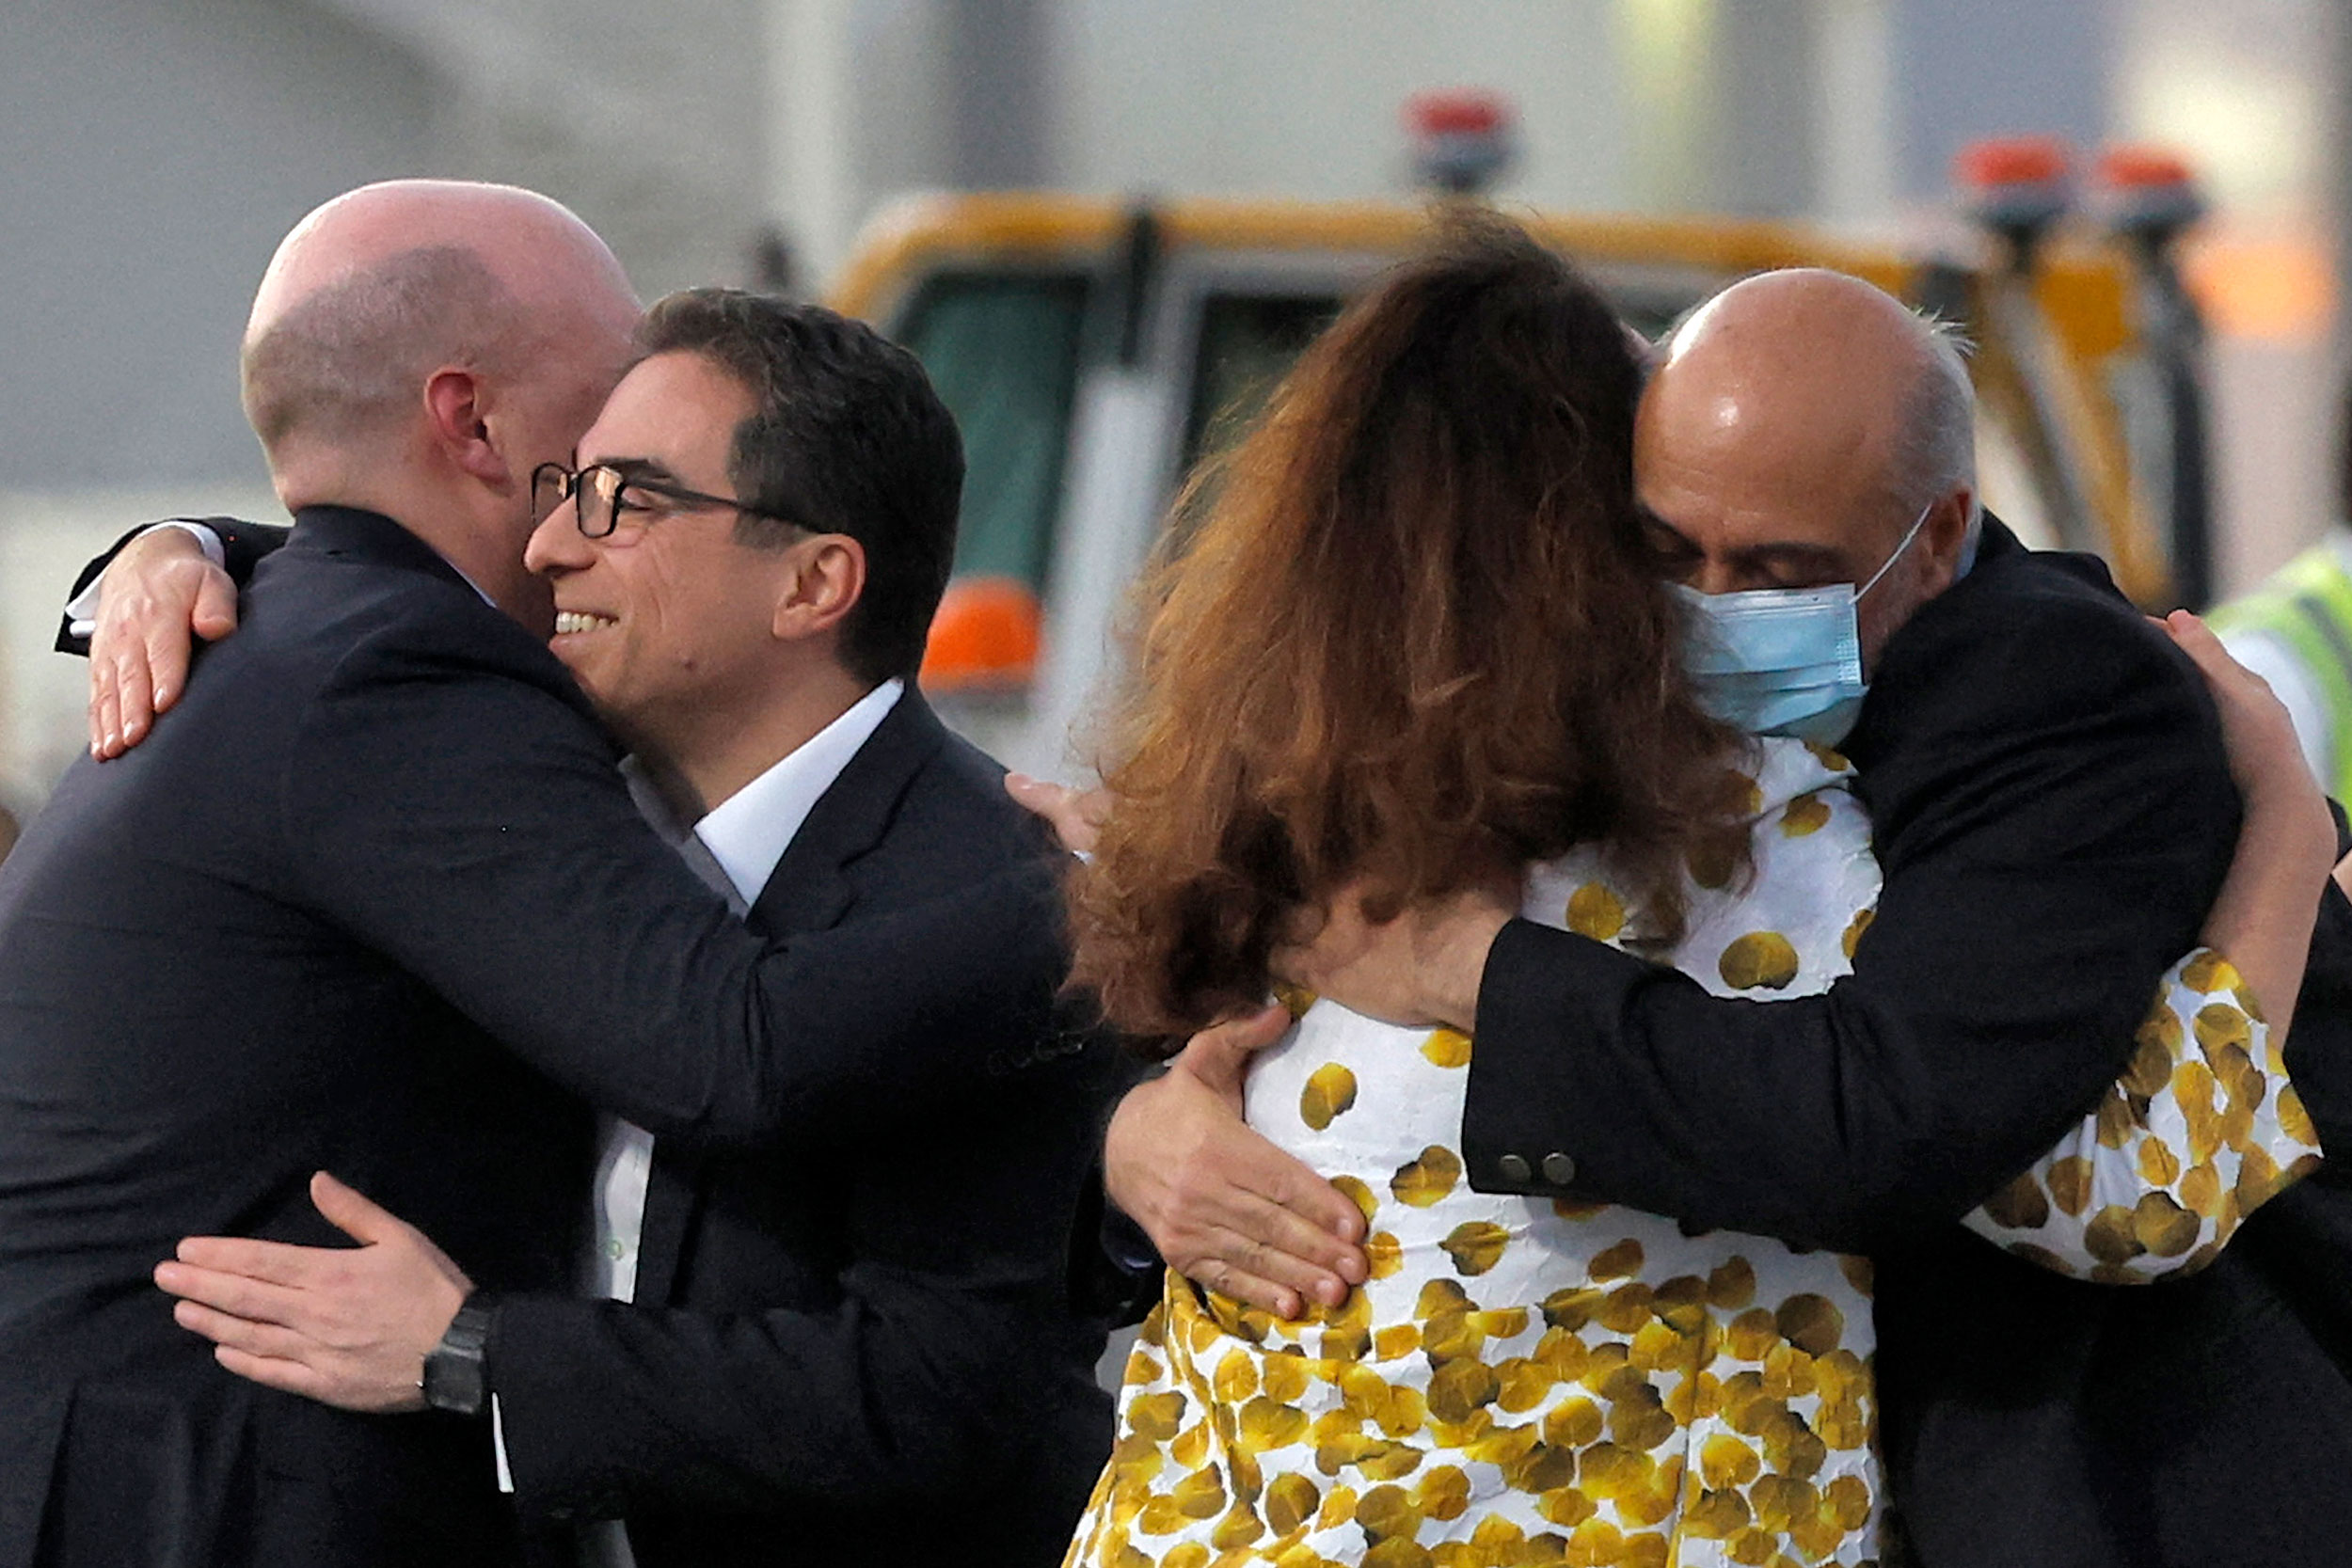 US citizens Siamak Namazi, second from left, and Morad Tahbaz, right, are embraced after disembarking from a jet in Doha, Qatar, on September 18, 2023.